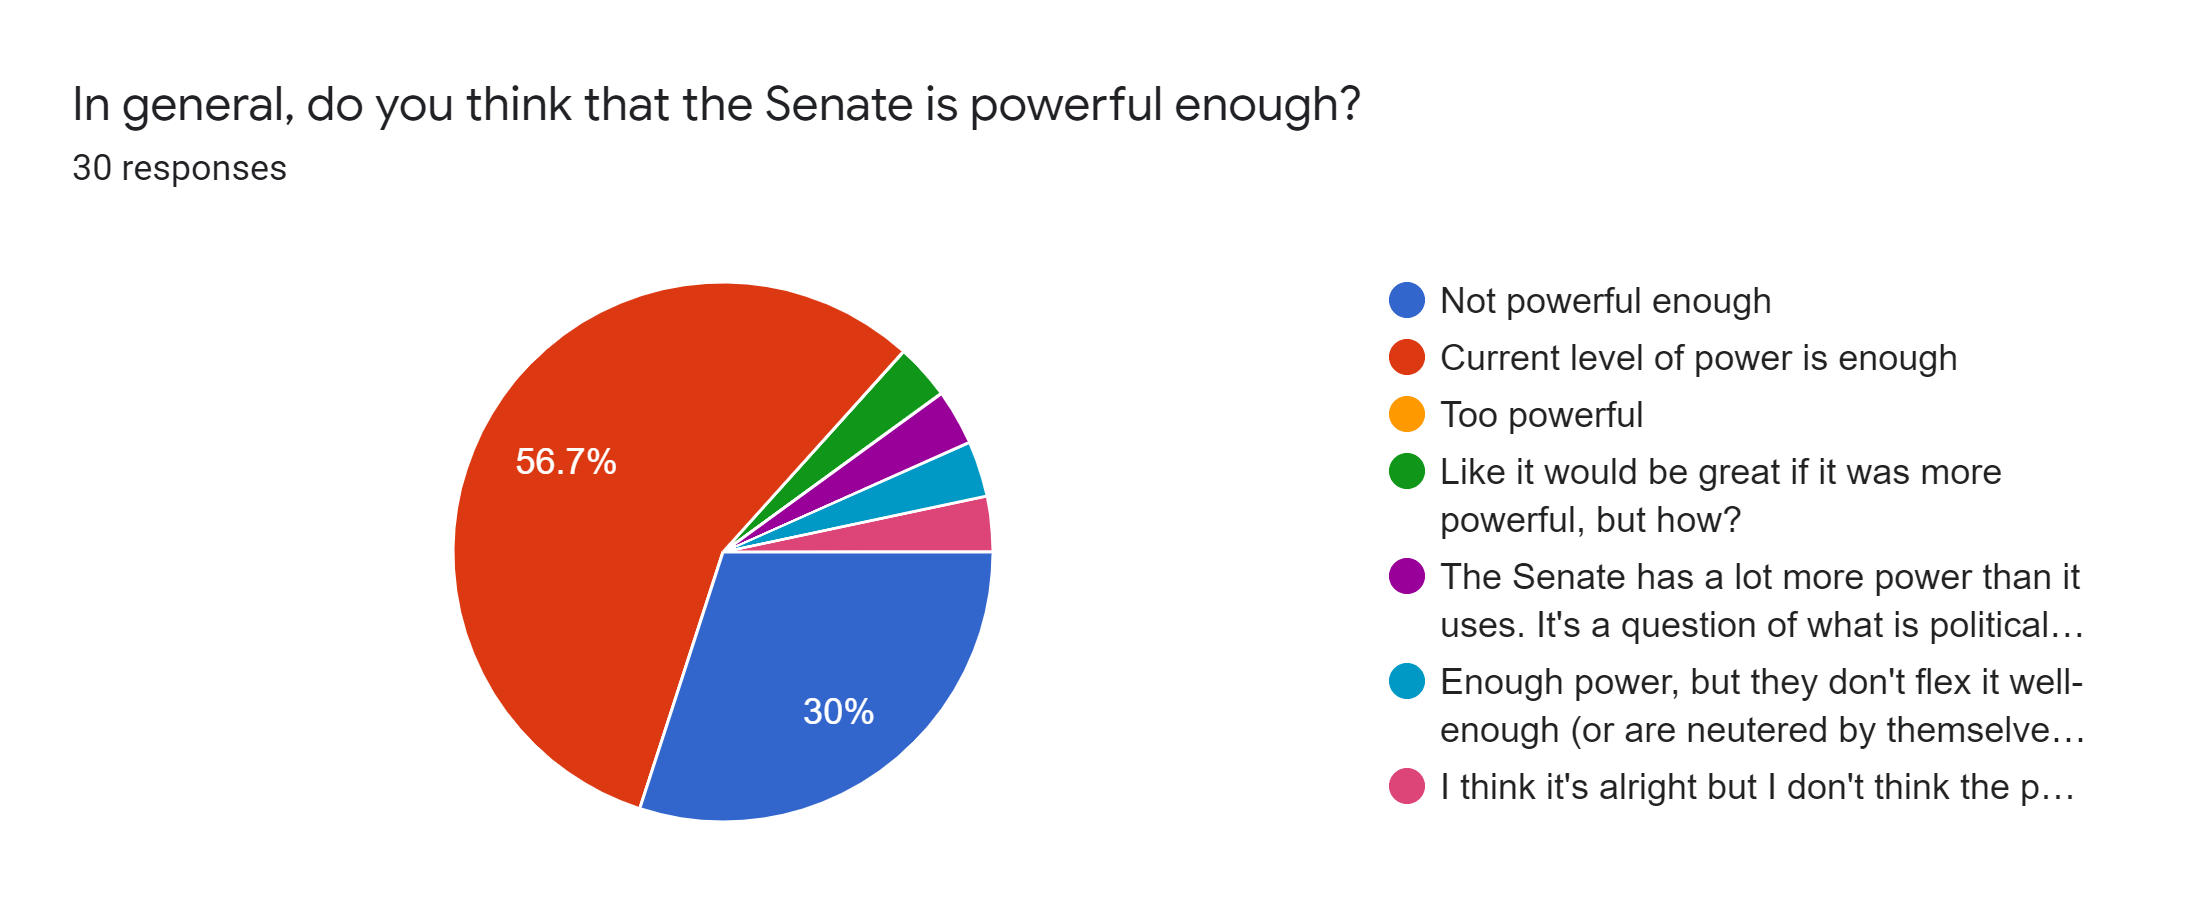 Forms response chart. Question title: In general, do you think that the Senate is powerful enough?. Number of responses: 30 responses.